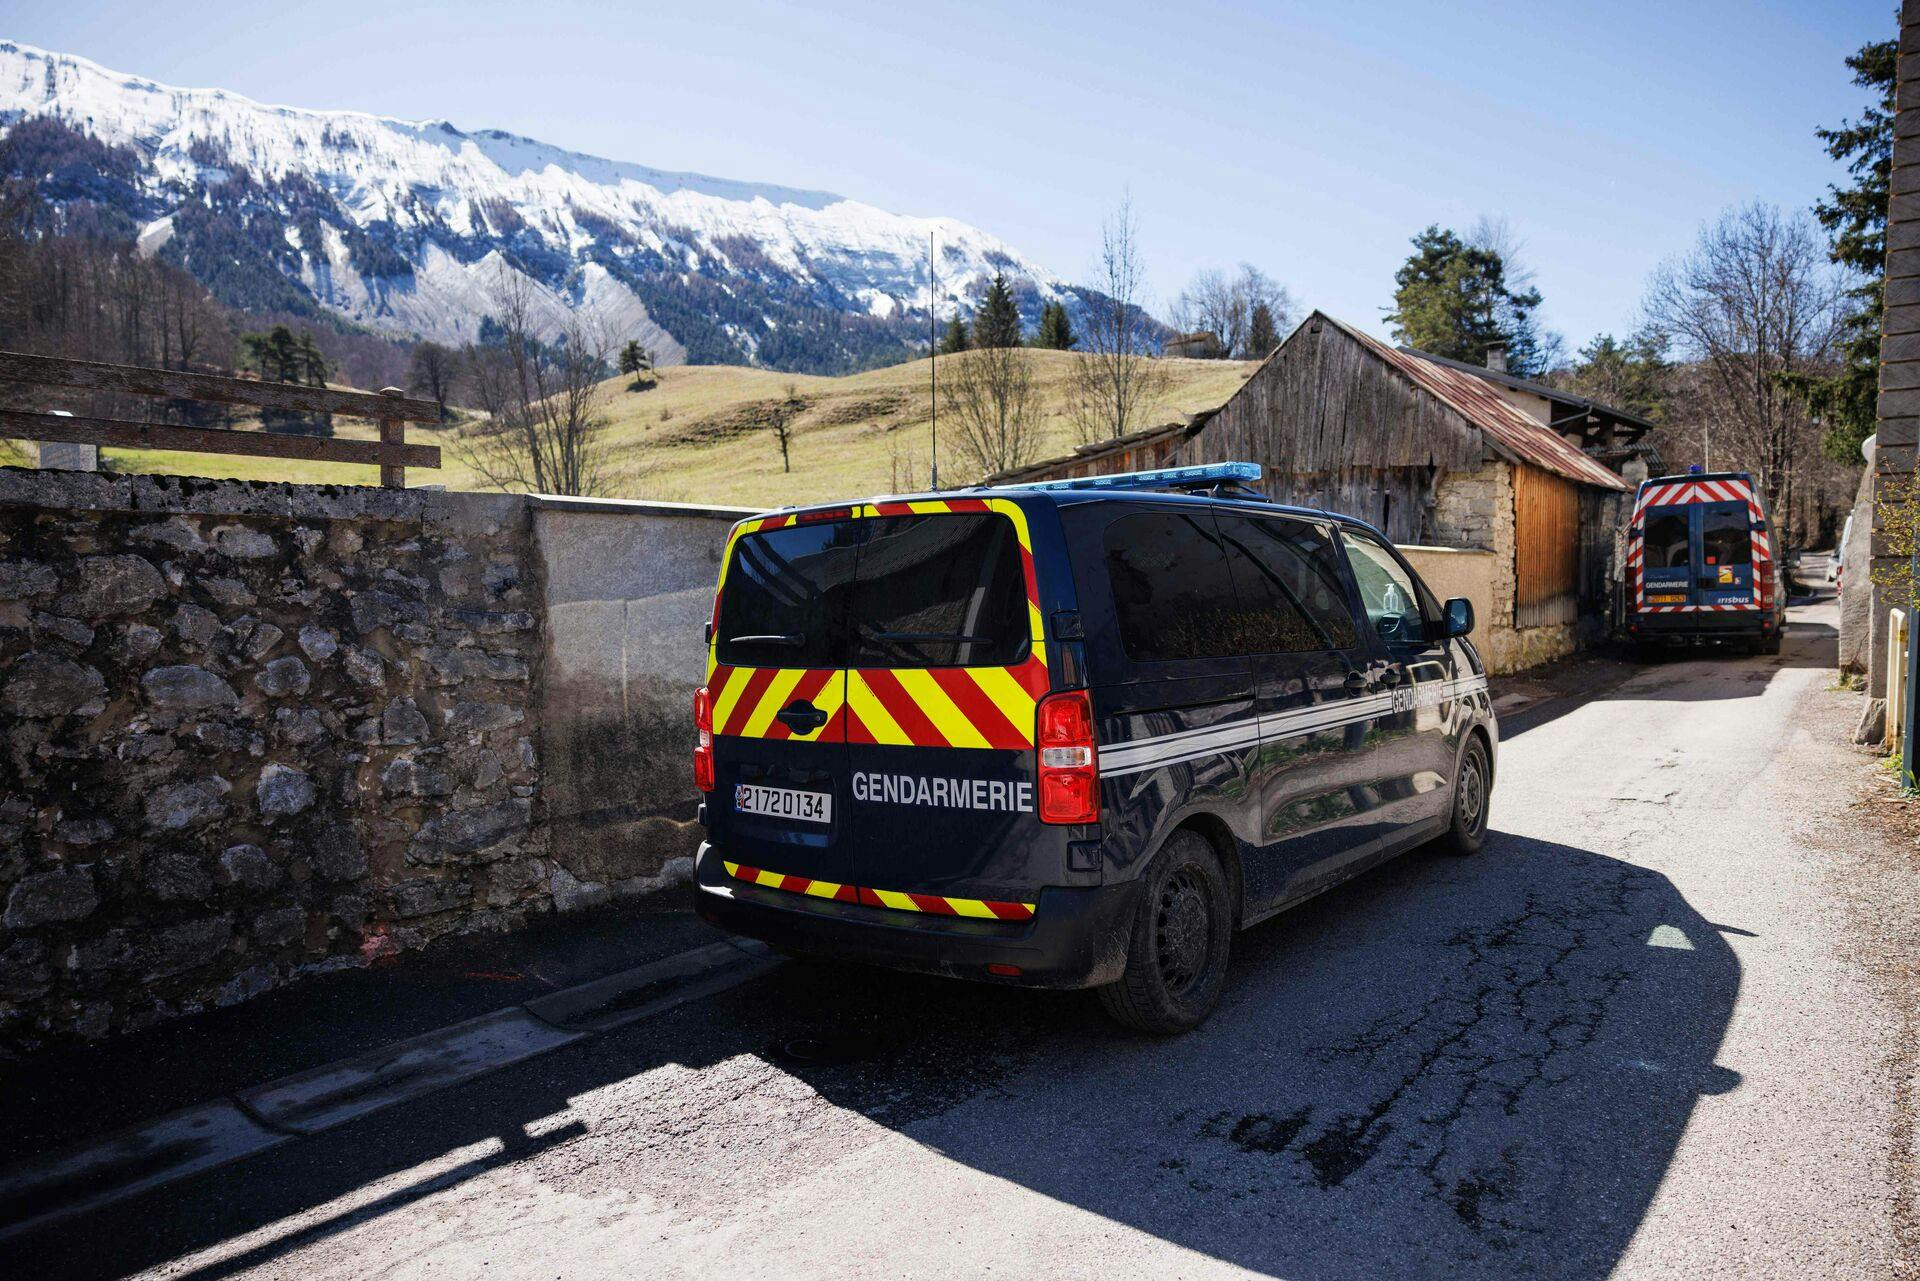 Vehicles of the gendarmerie run through the French southern Alps tiny village of Le Haut-Vernet, in Le Vernet on April 2, 2024, two days after French investigators have found the "bones" of a toddler who went missing last summer. The discovery is the first major breakthrough in the case of two-and-a-half-year-old Emile, who vanished on July 8 last year while staying with his grandparents. (Photo by CLEMENT MAHOUDEAU / AFP)